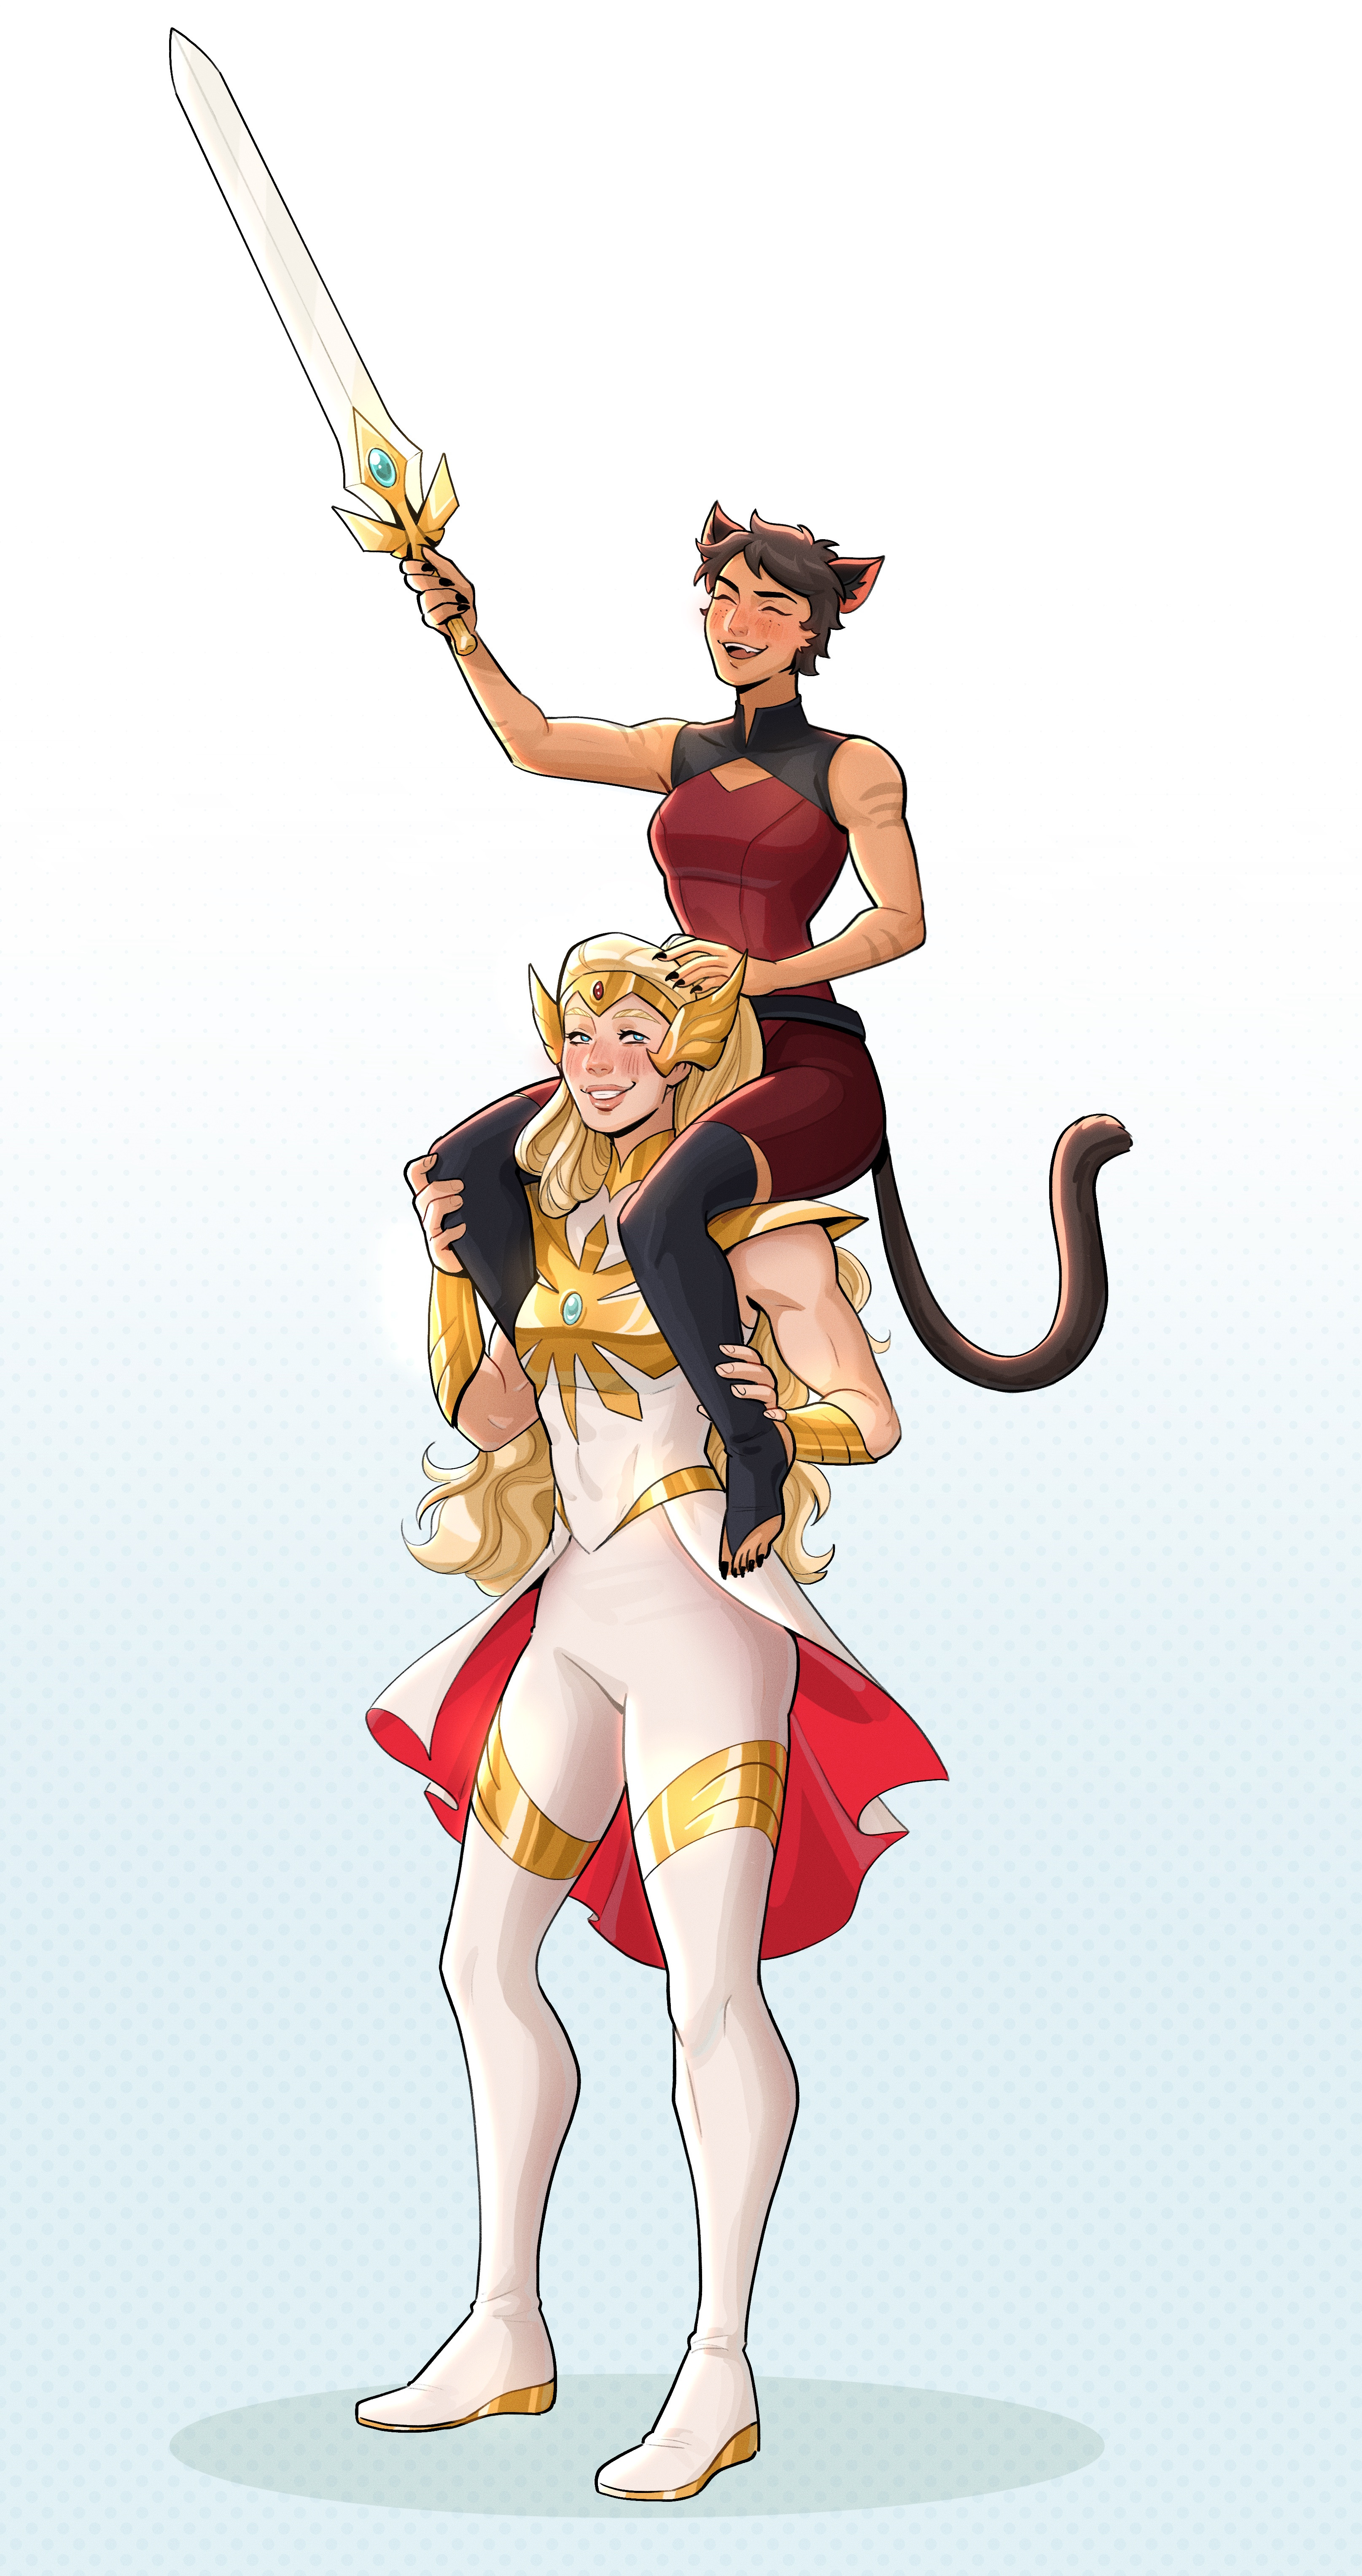 Commission for anonymous on twitter, Catra and Adora from She-Ha cartoon